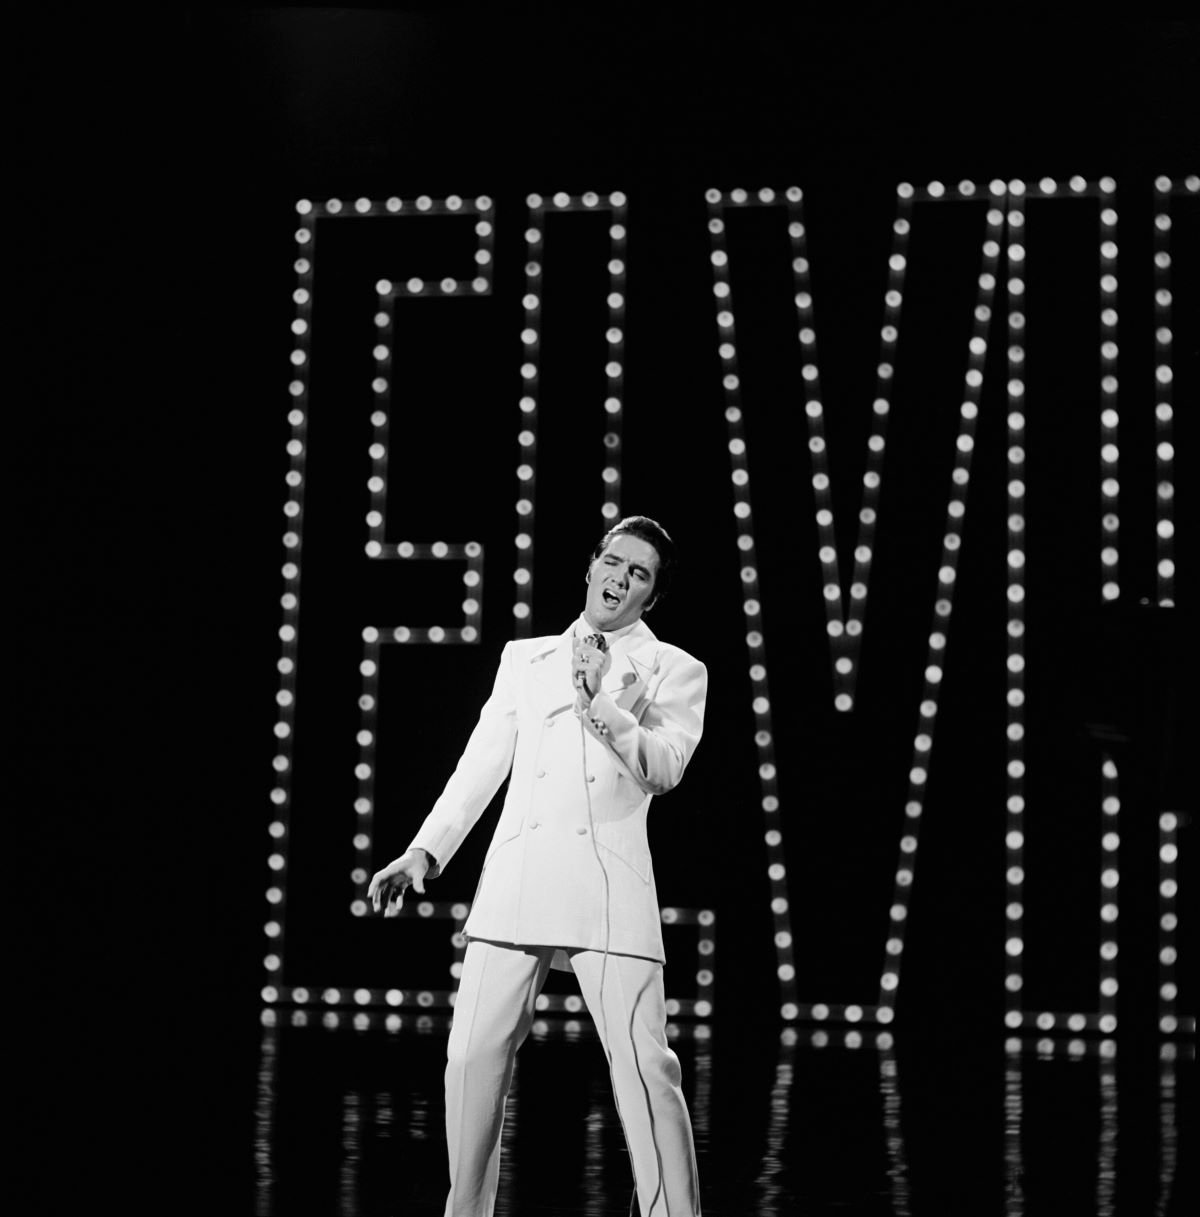 A black and white picture of Elvis Presley singing into a microphone in front of his name in lights.